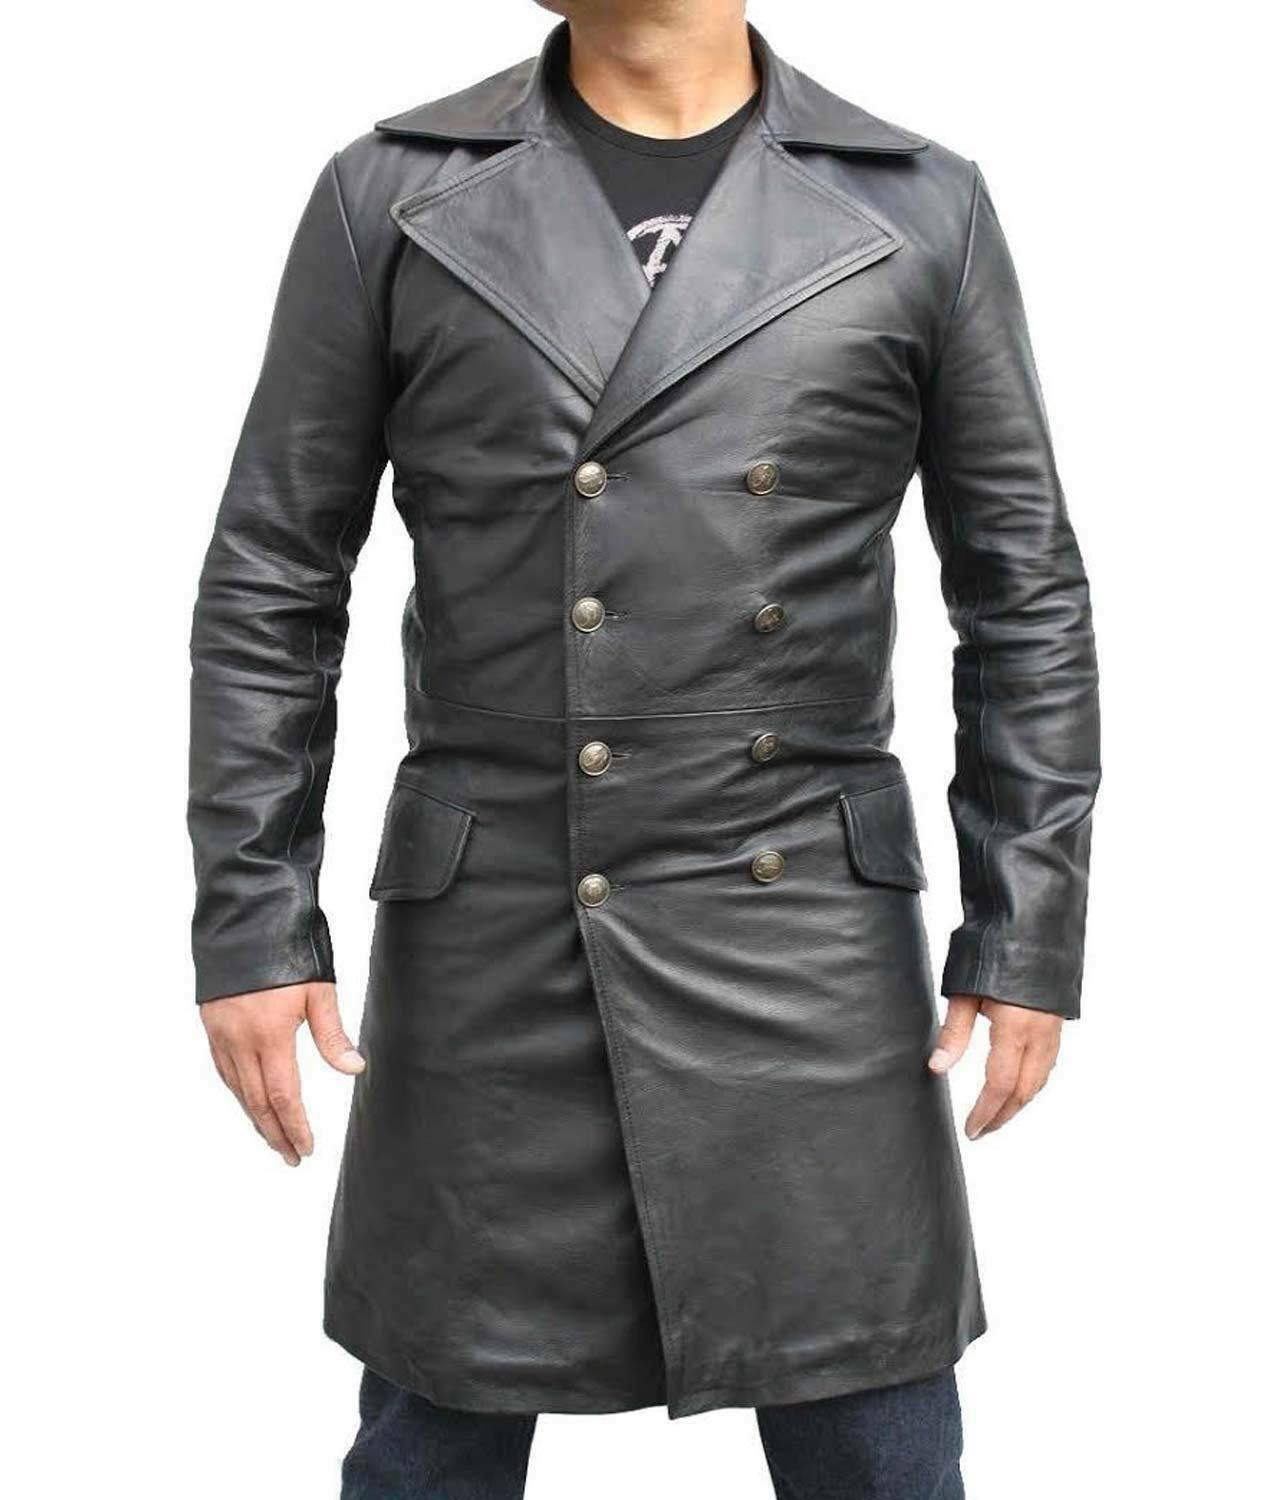 Spine Spark Most Stylish Johnny Depp Sweeney Todd Leather Coat